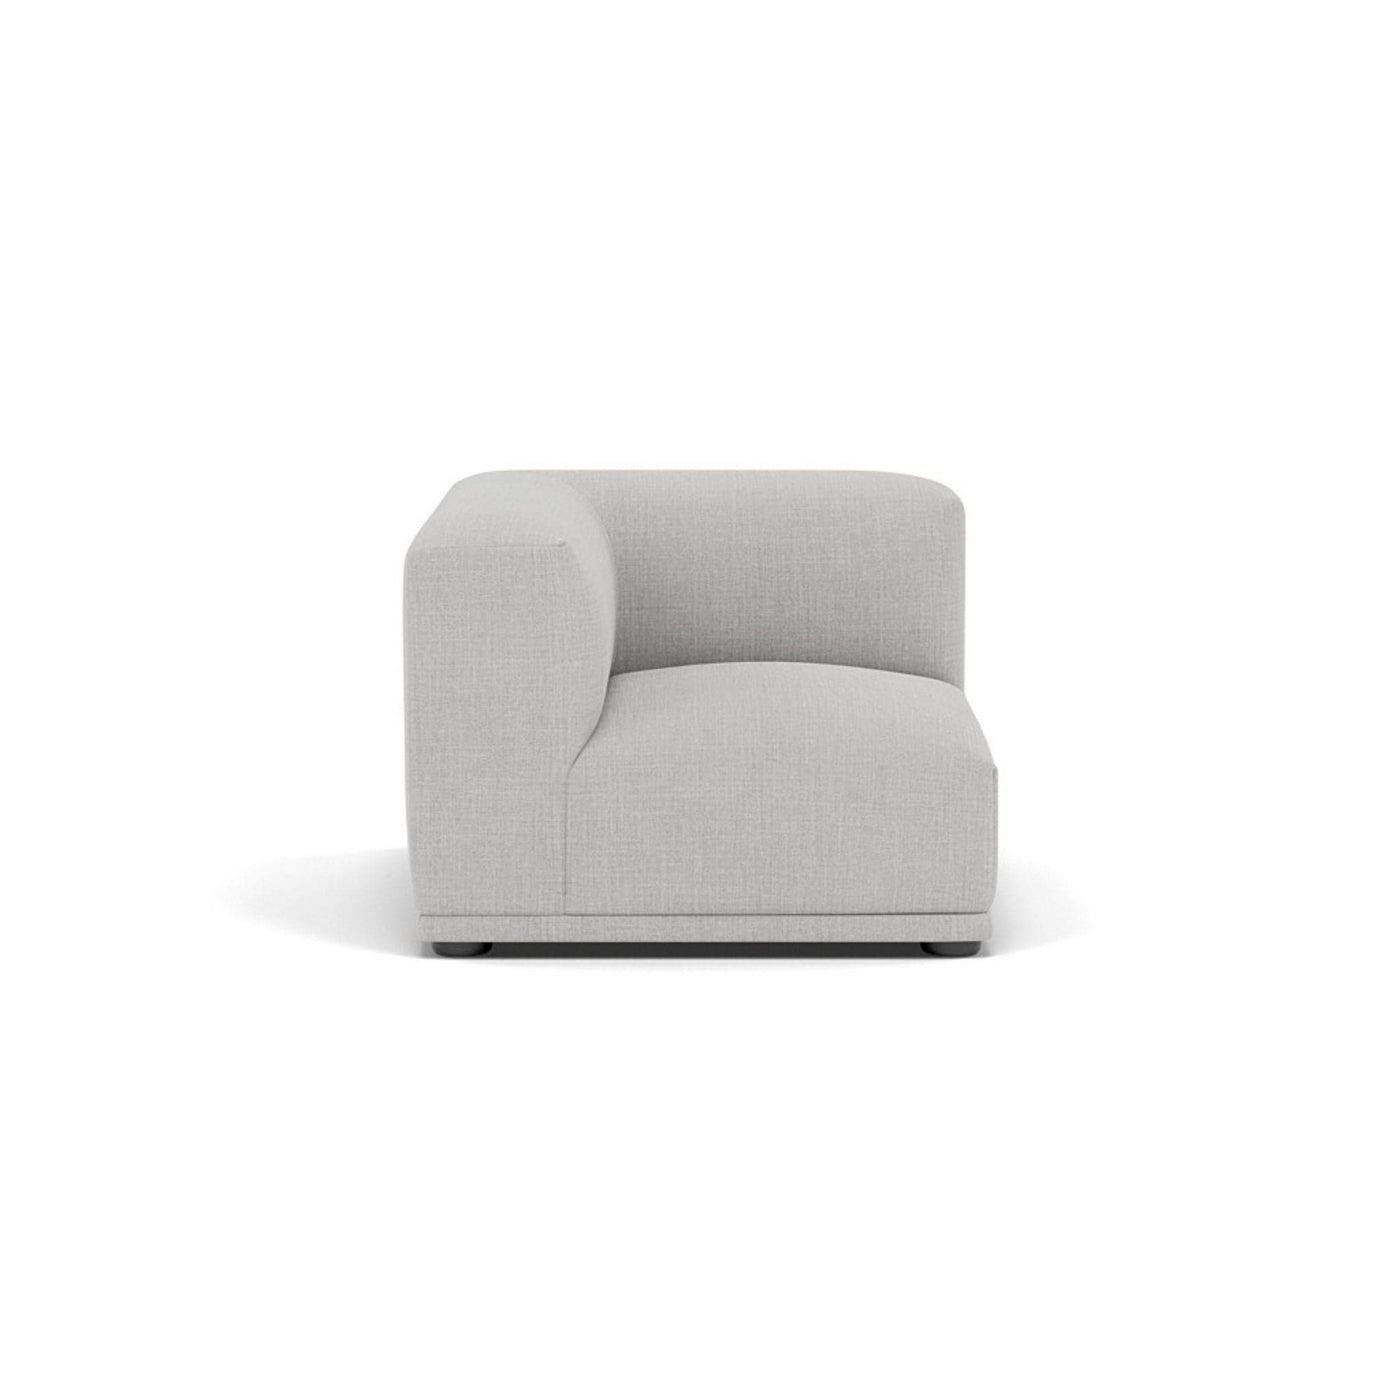 Muuto Connect Modular Sofa System, module e, corner, remix 123 grey fabric. Available from someday designs. #colour_remix-123